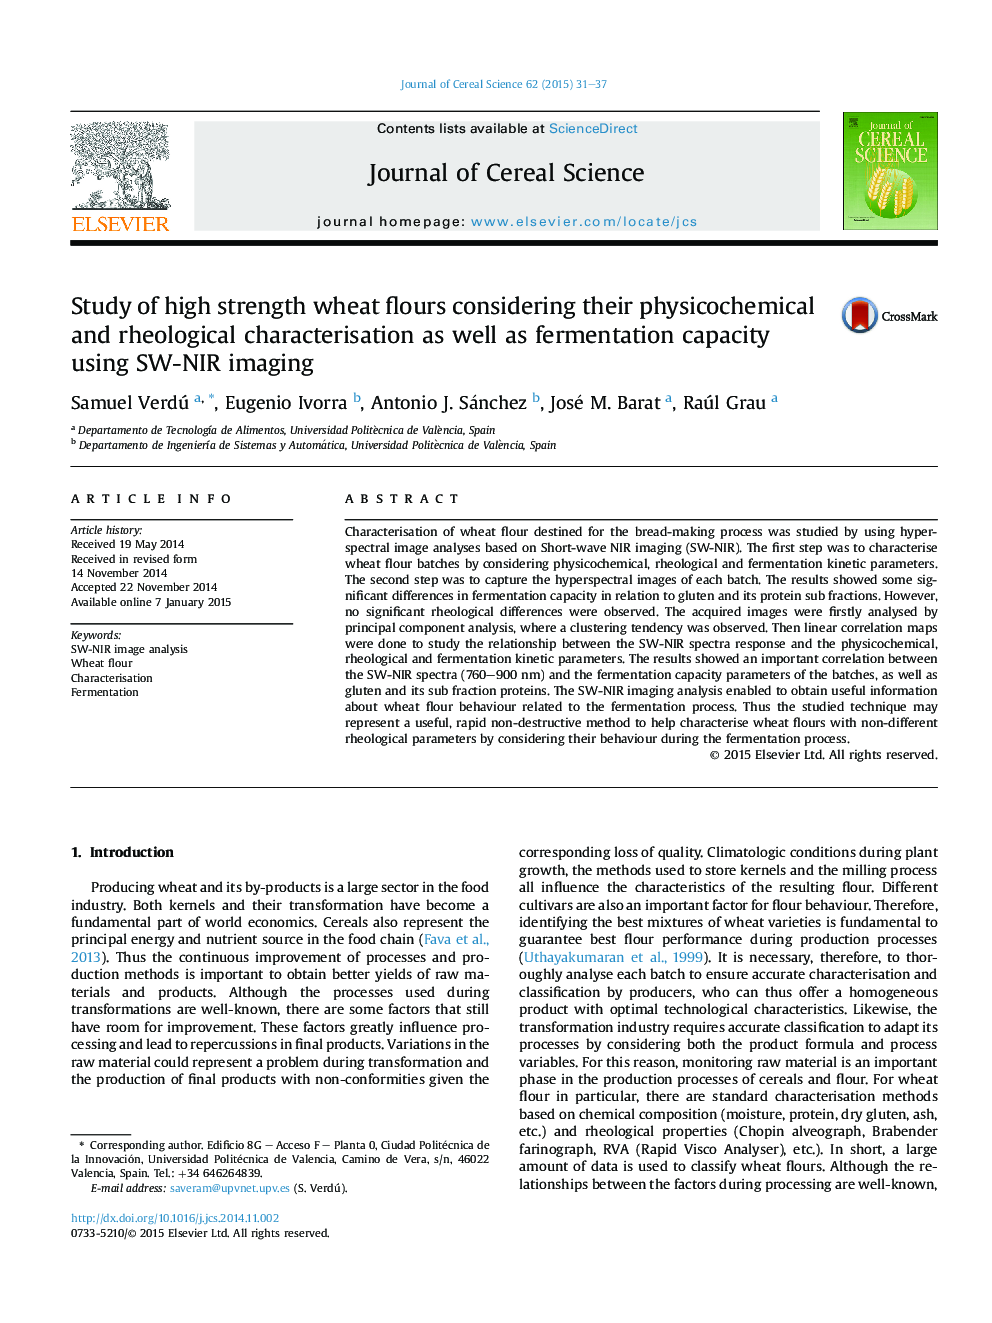 Study of high strength wheat flours considering their physicochemical and rheological characterisation as well as fermentation capacity using SW-NIR imaging